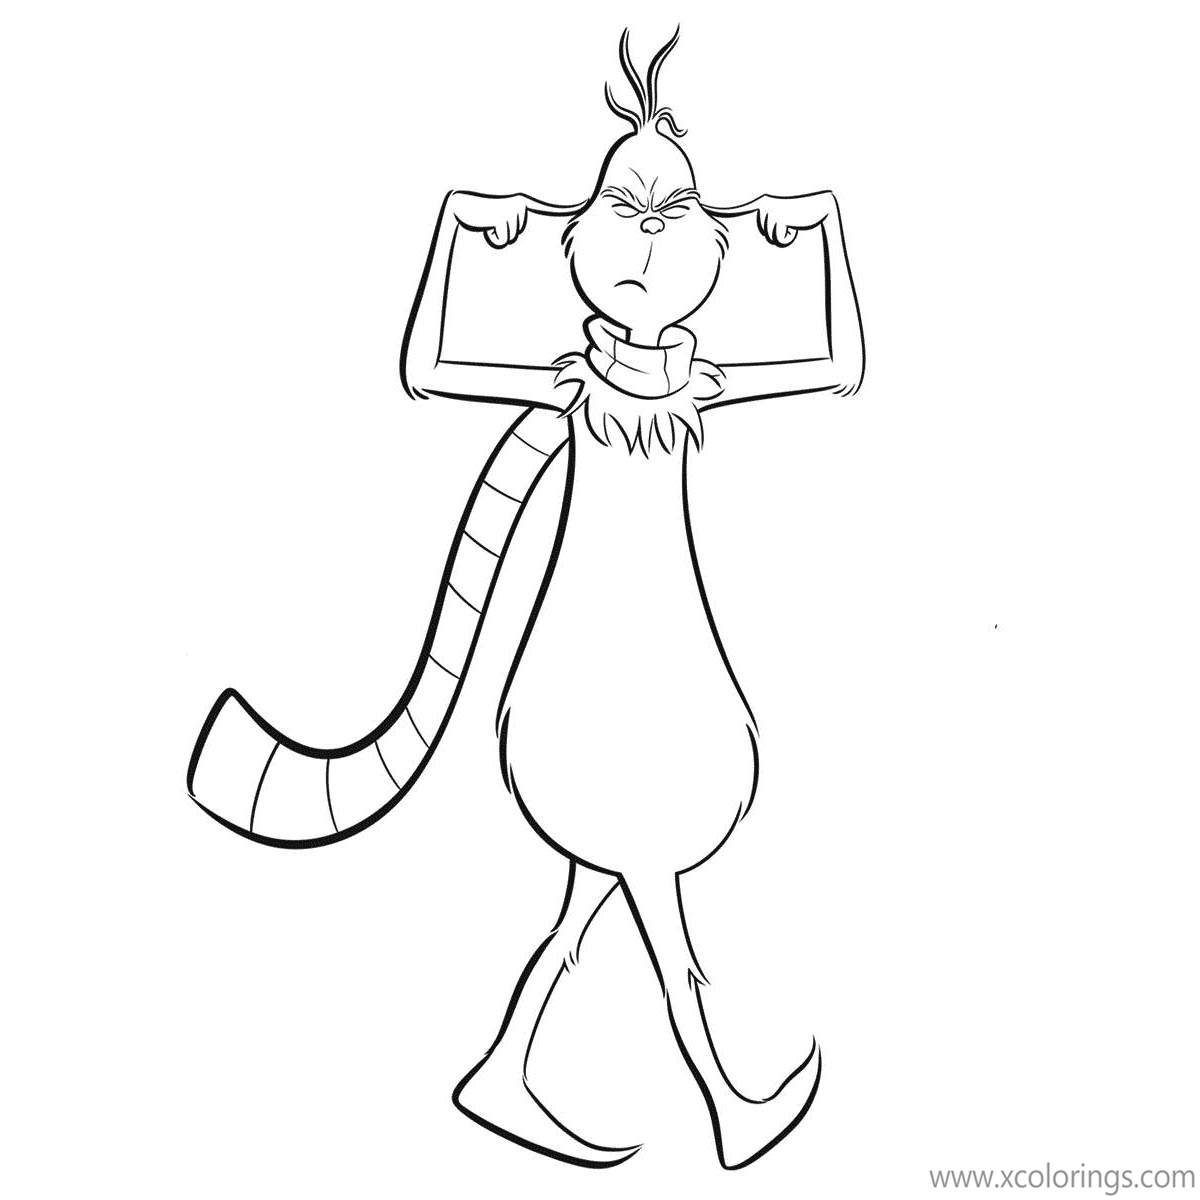 Free Dr. Seuss Grinch Coloring Pages printable